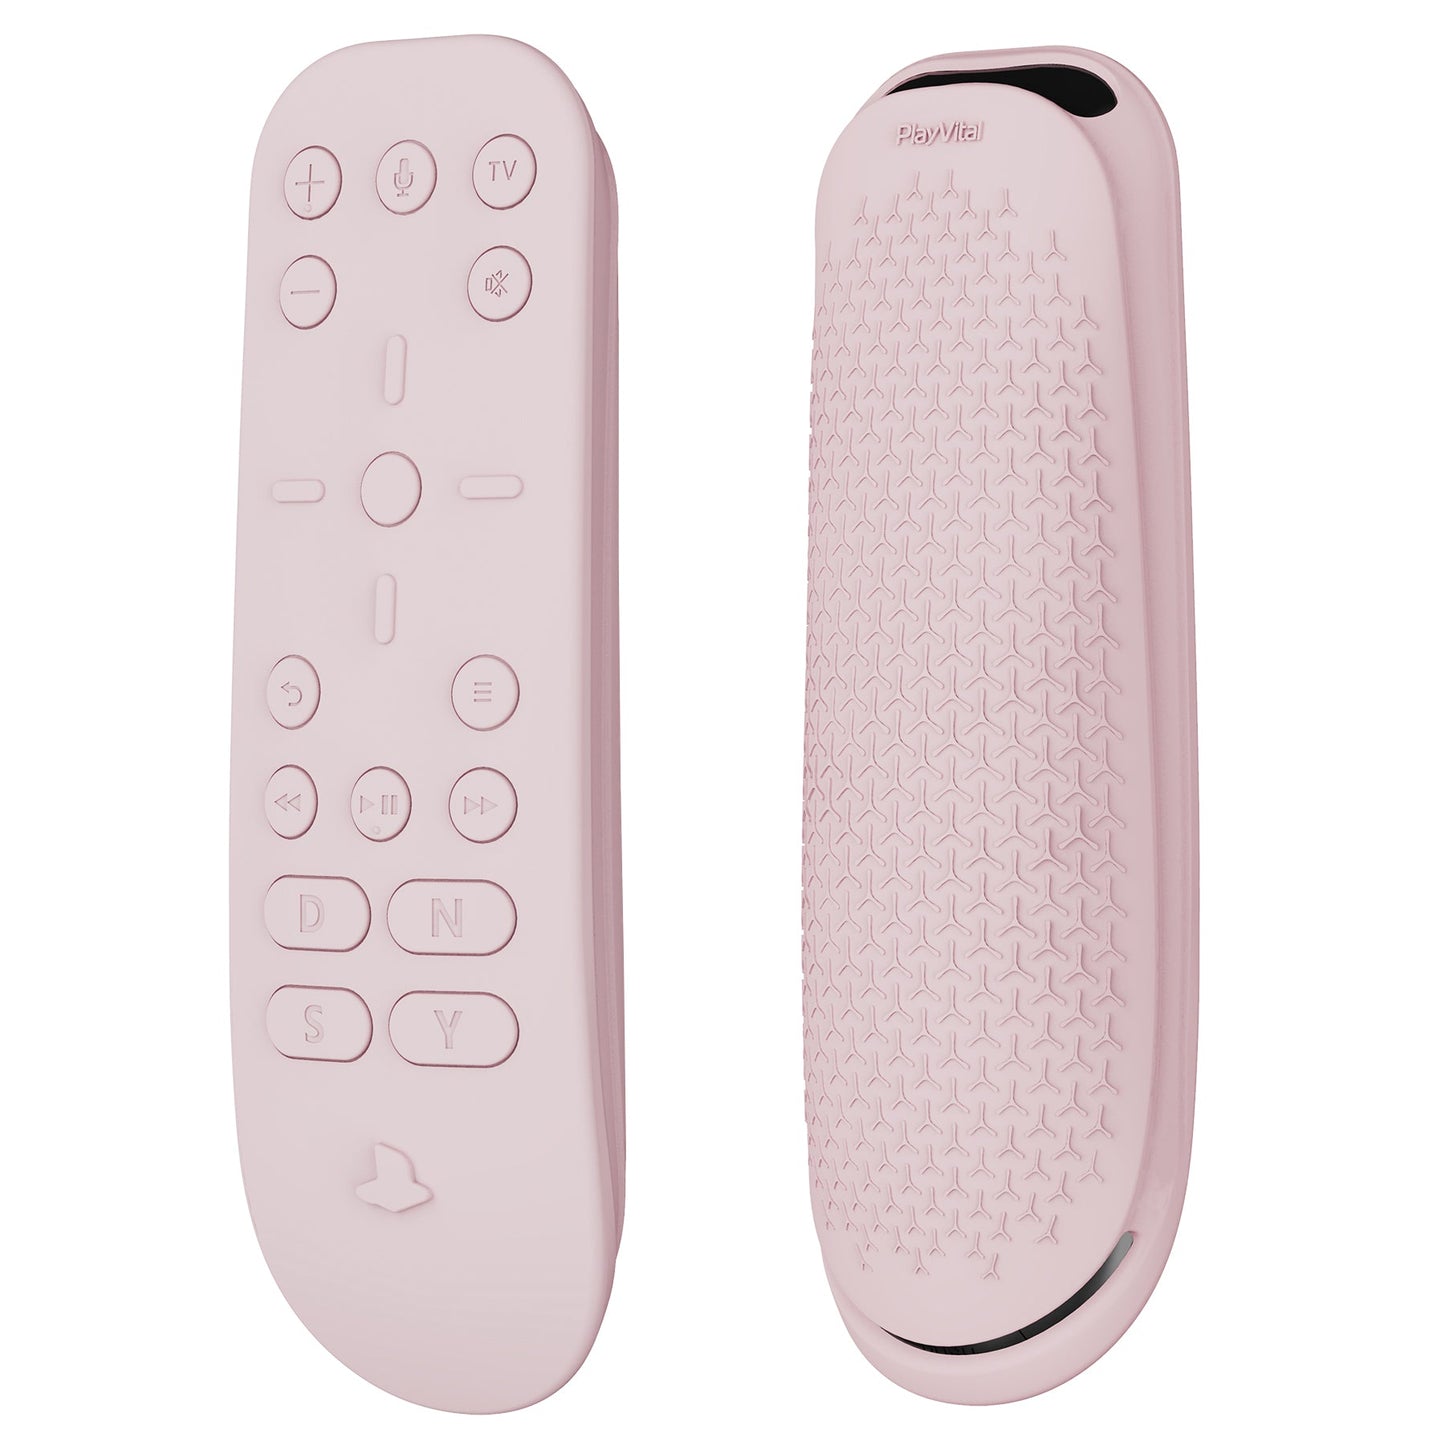 PlayVital Cherry Blossoms Pink Silicone Protective Remote Case for PS5 Media Remote Cover, Ergonomic Design Full Body Protector Skin for PS5 Remote Control - PFPJ037 PlayVital